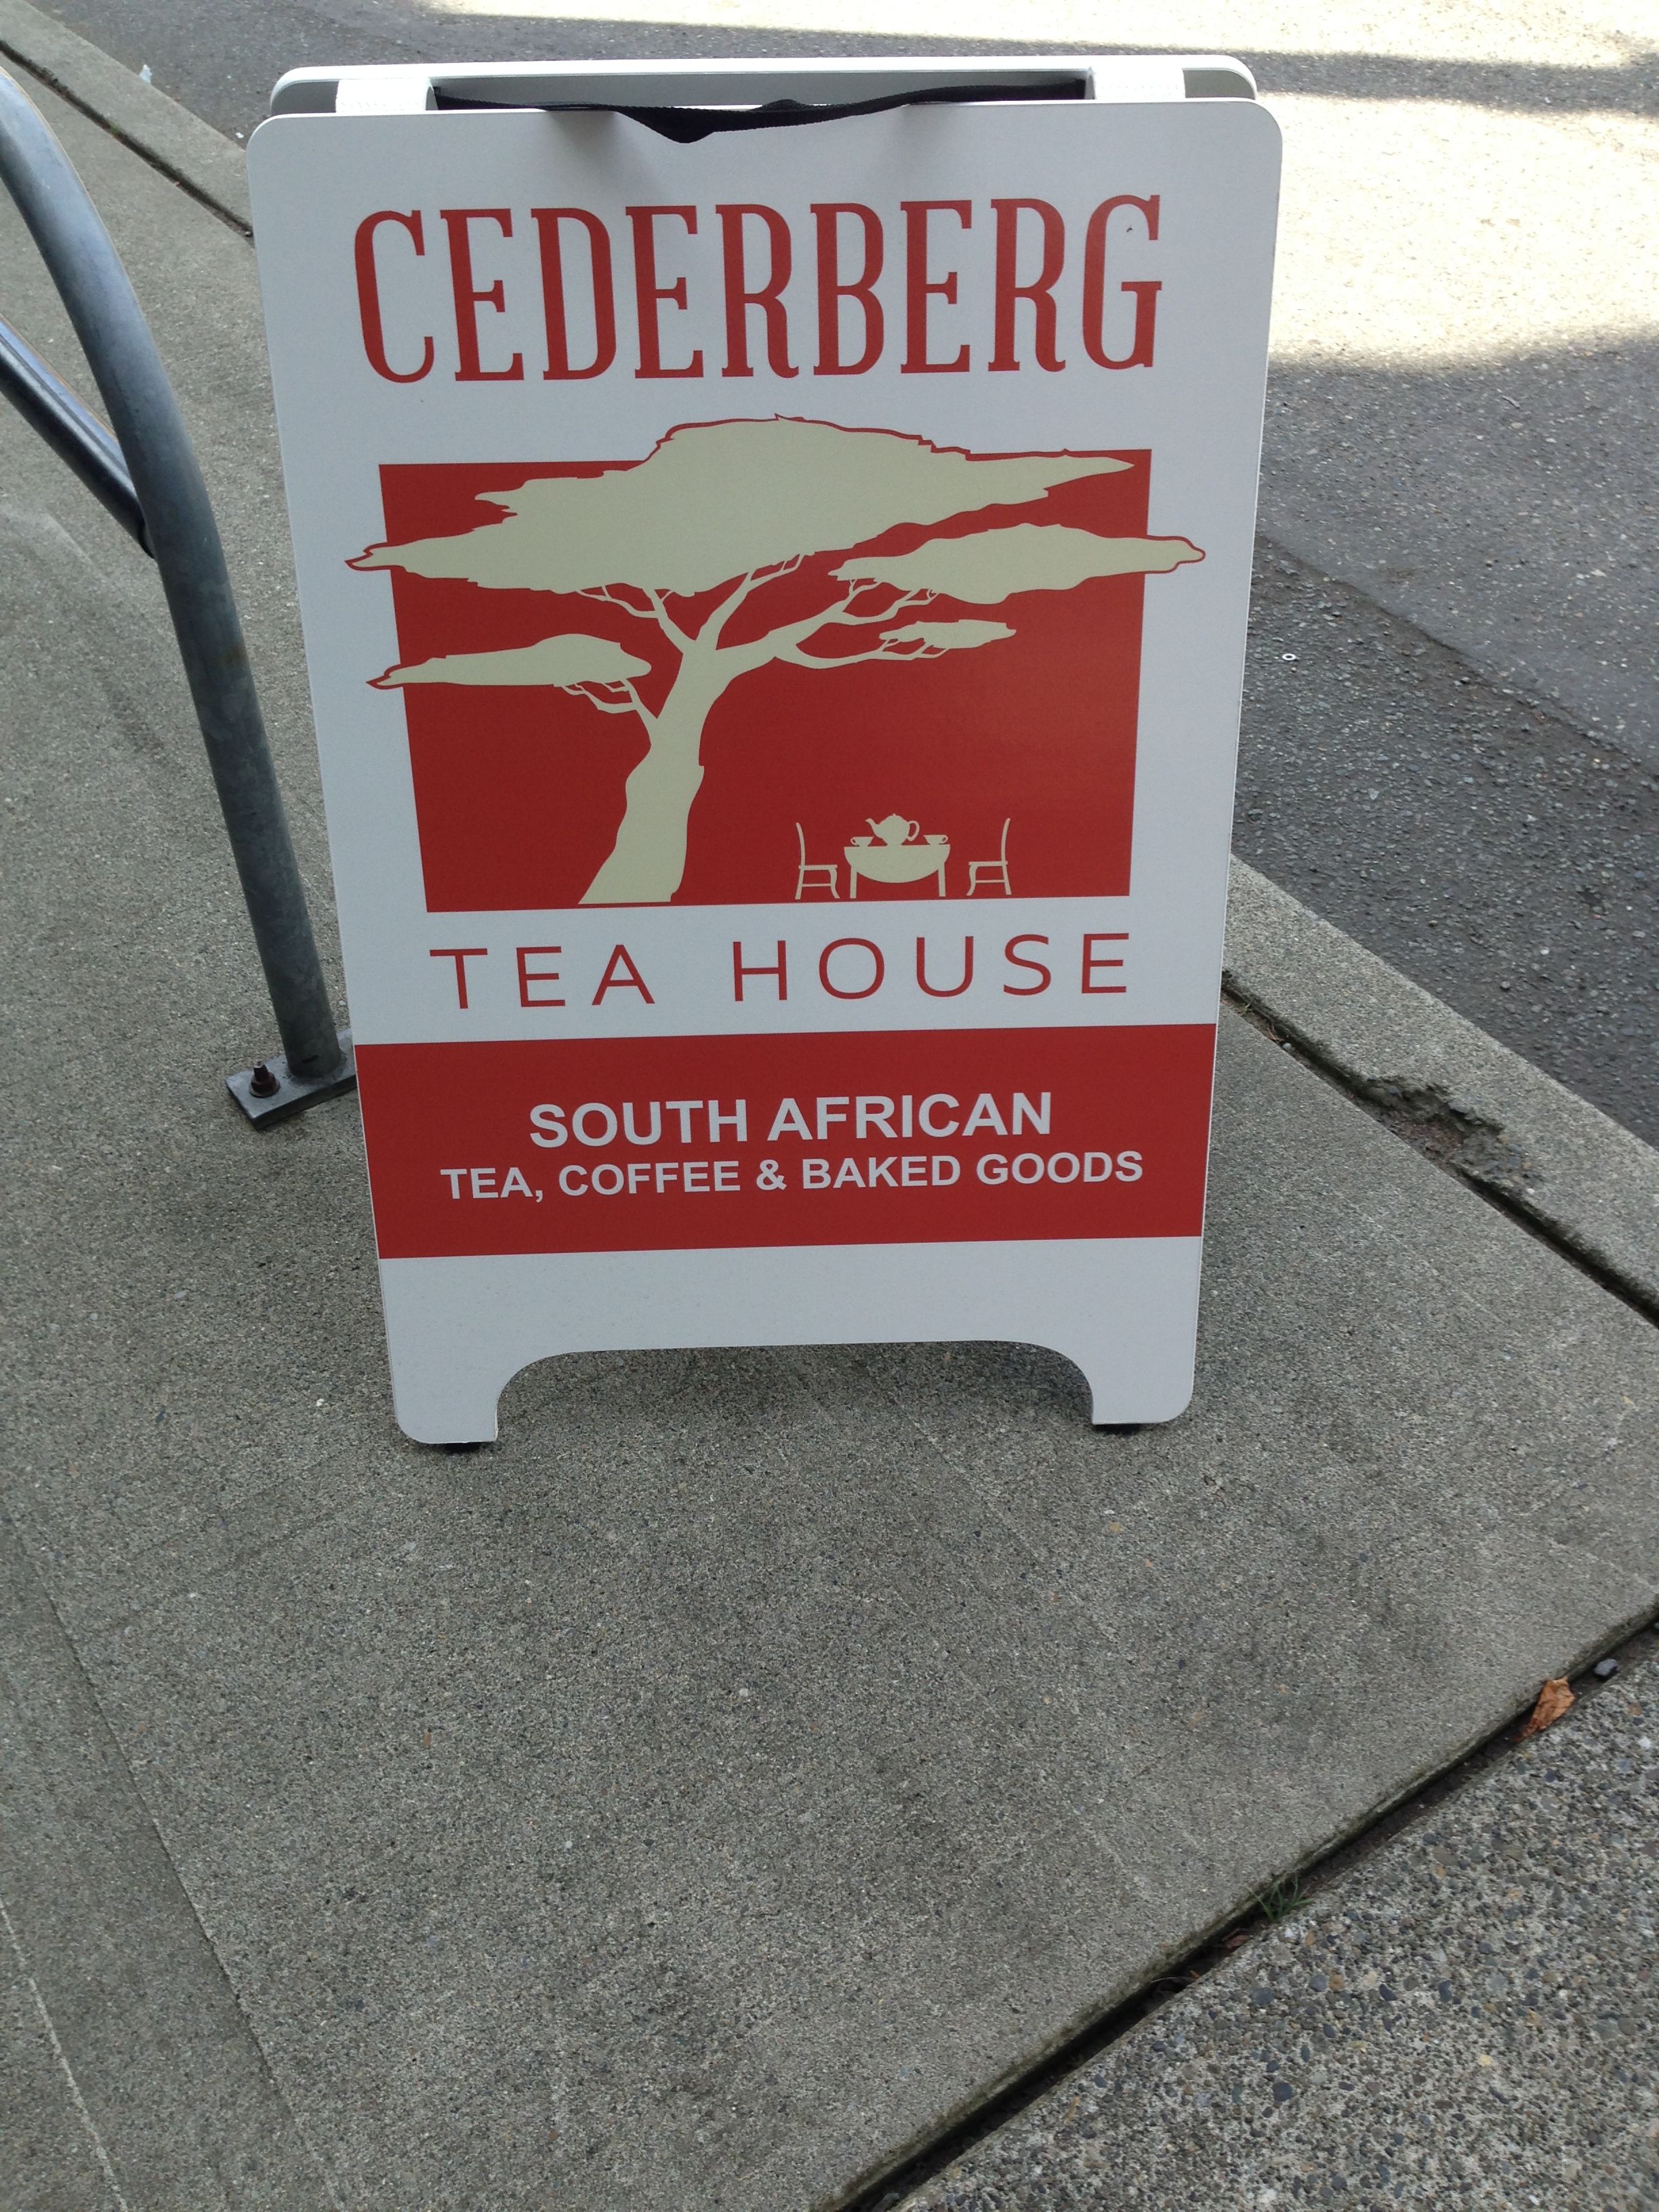 There’s a new tea house in town, but it’s not like any